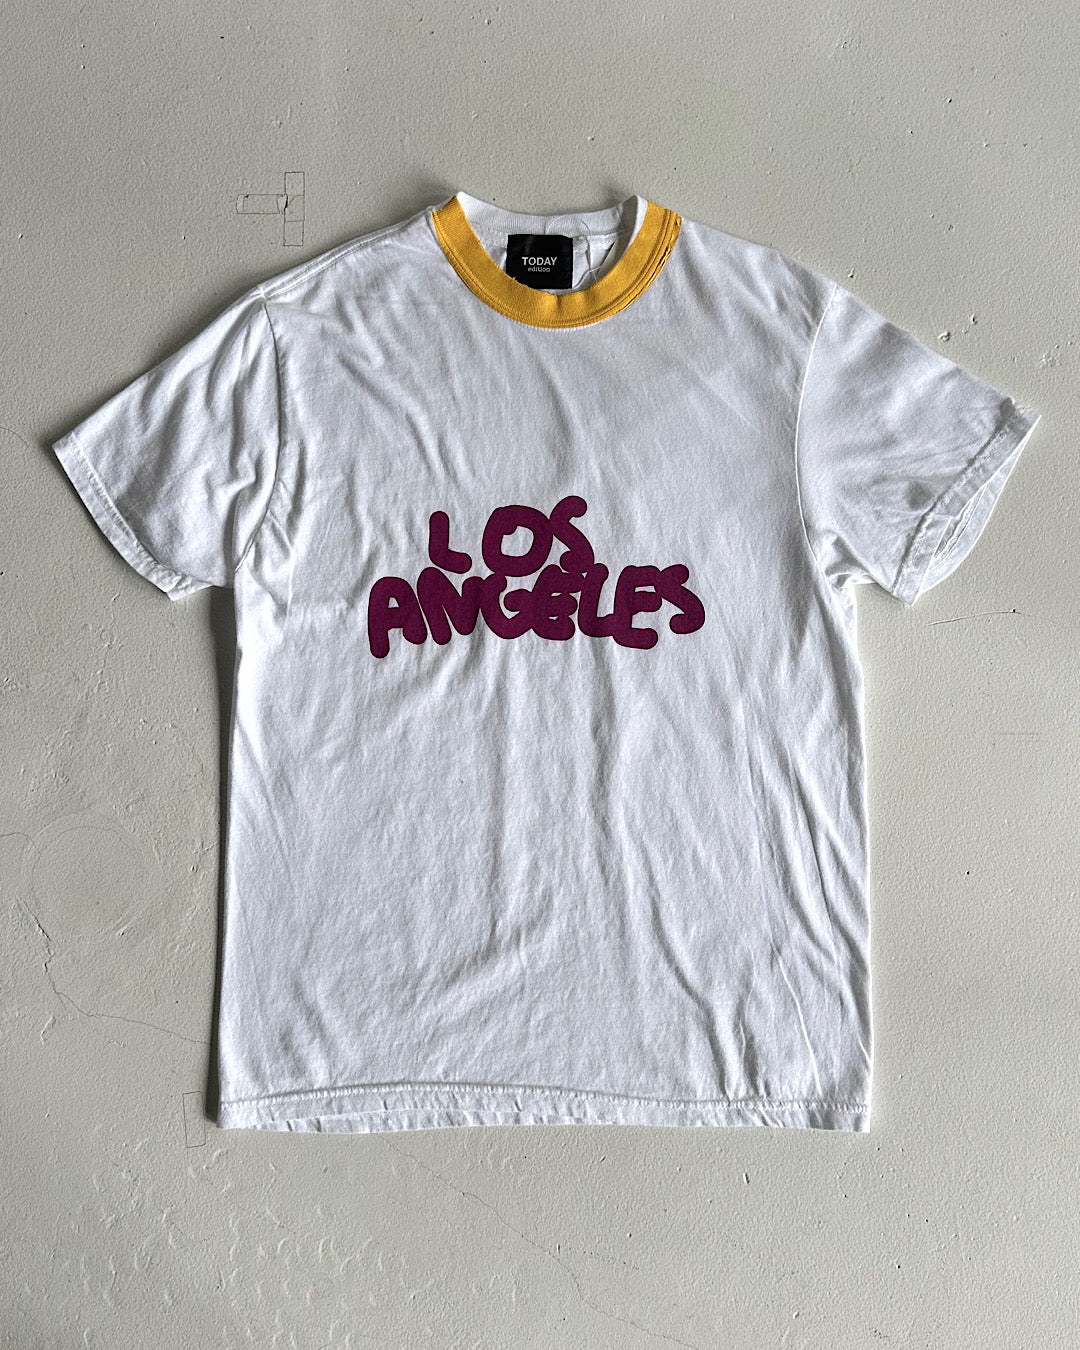 TODAY edition / Printed Ringer "LOS ANGELS" SS Tee - WHITE